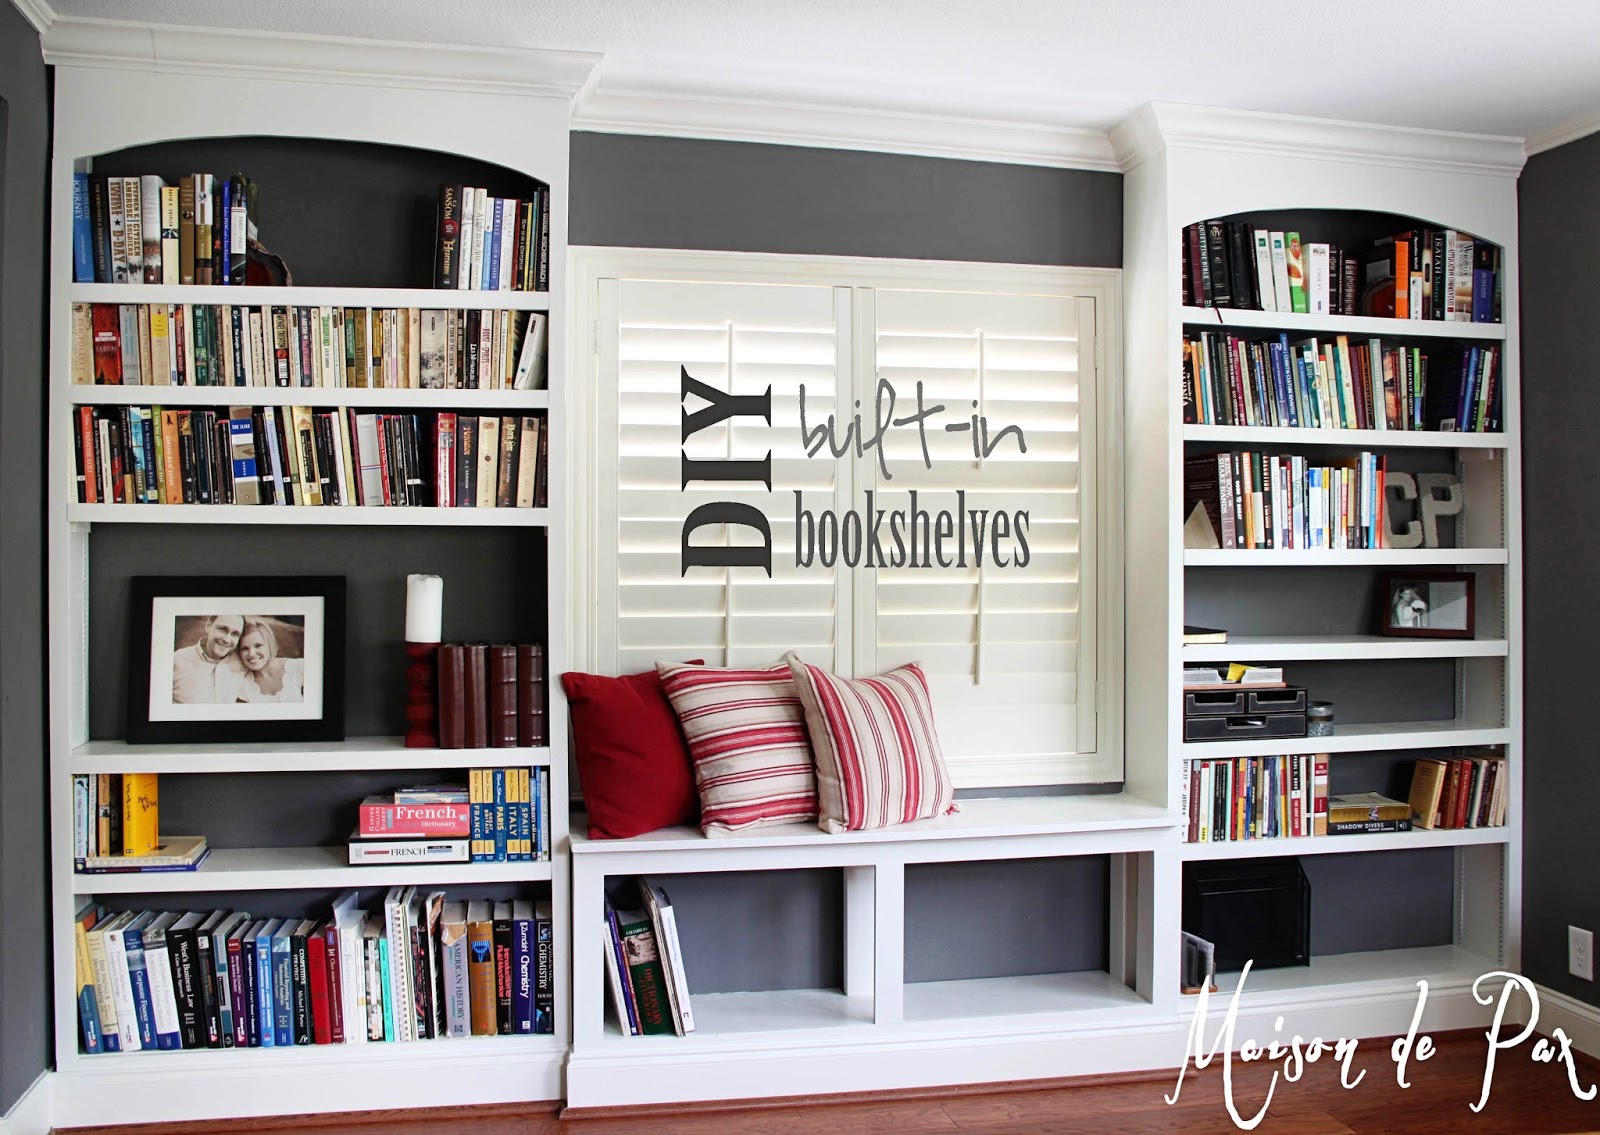 Diy Built In Bookshelves Maison De Pax, How Much Does It Cost To Build Built In Bookcases